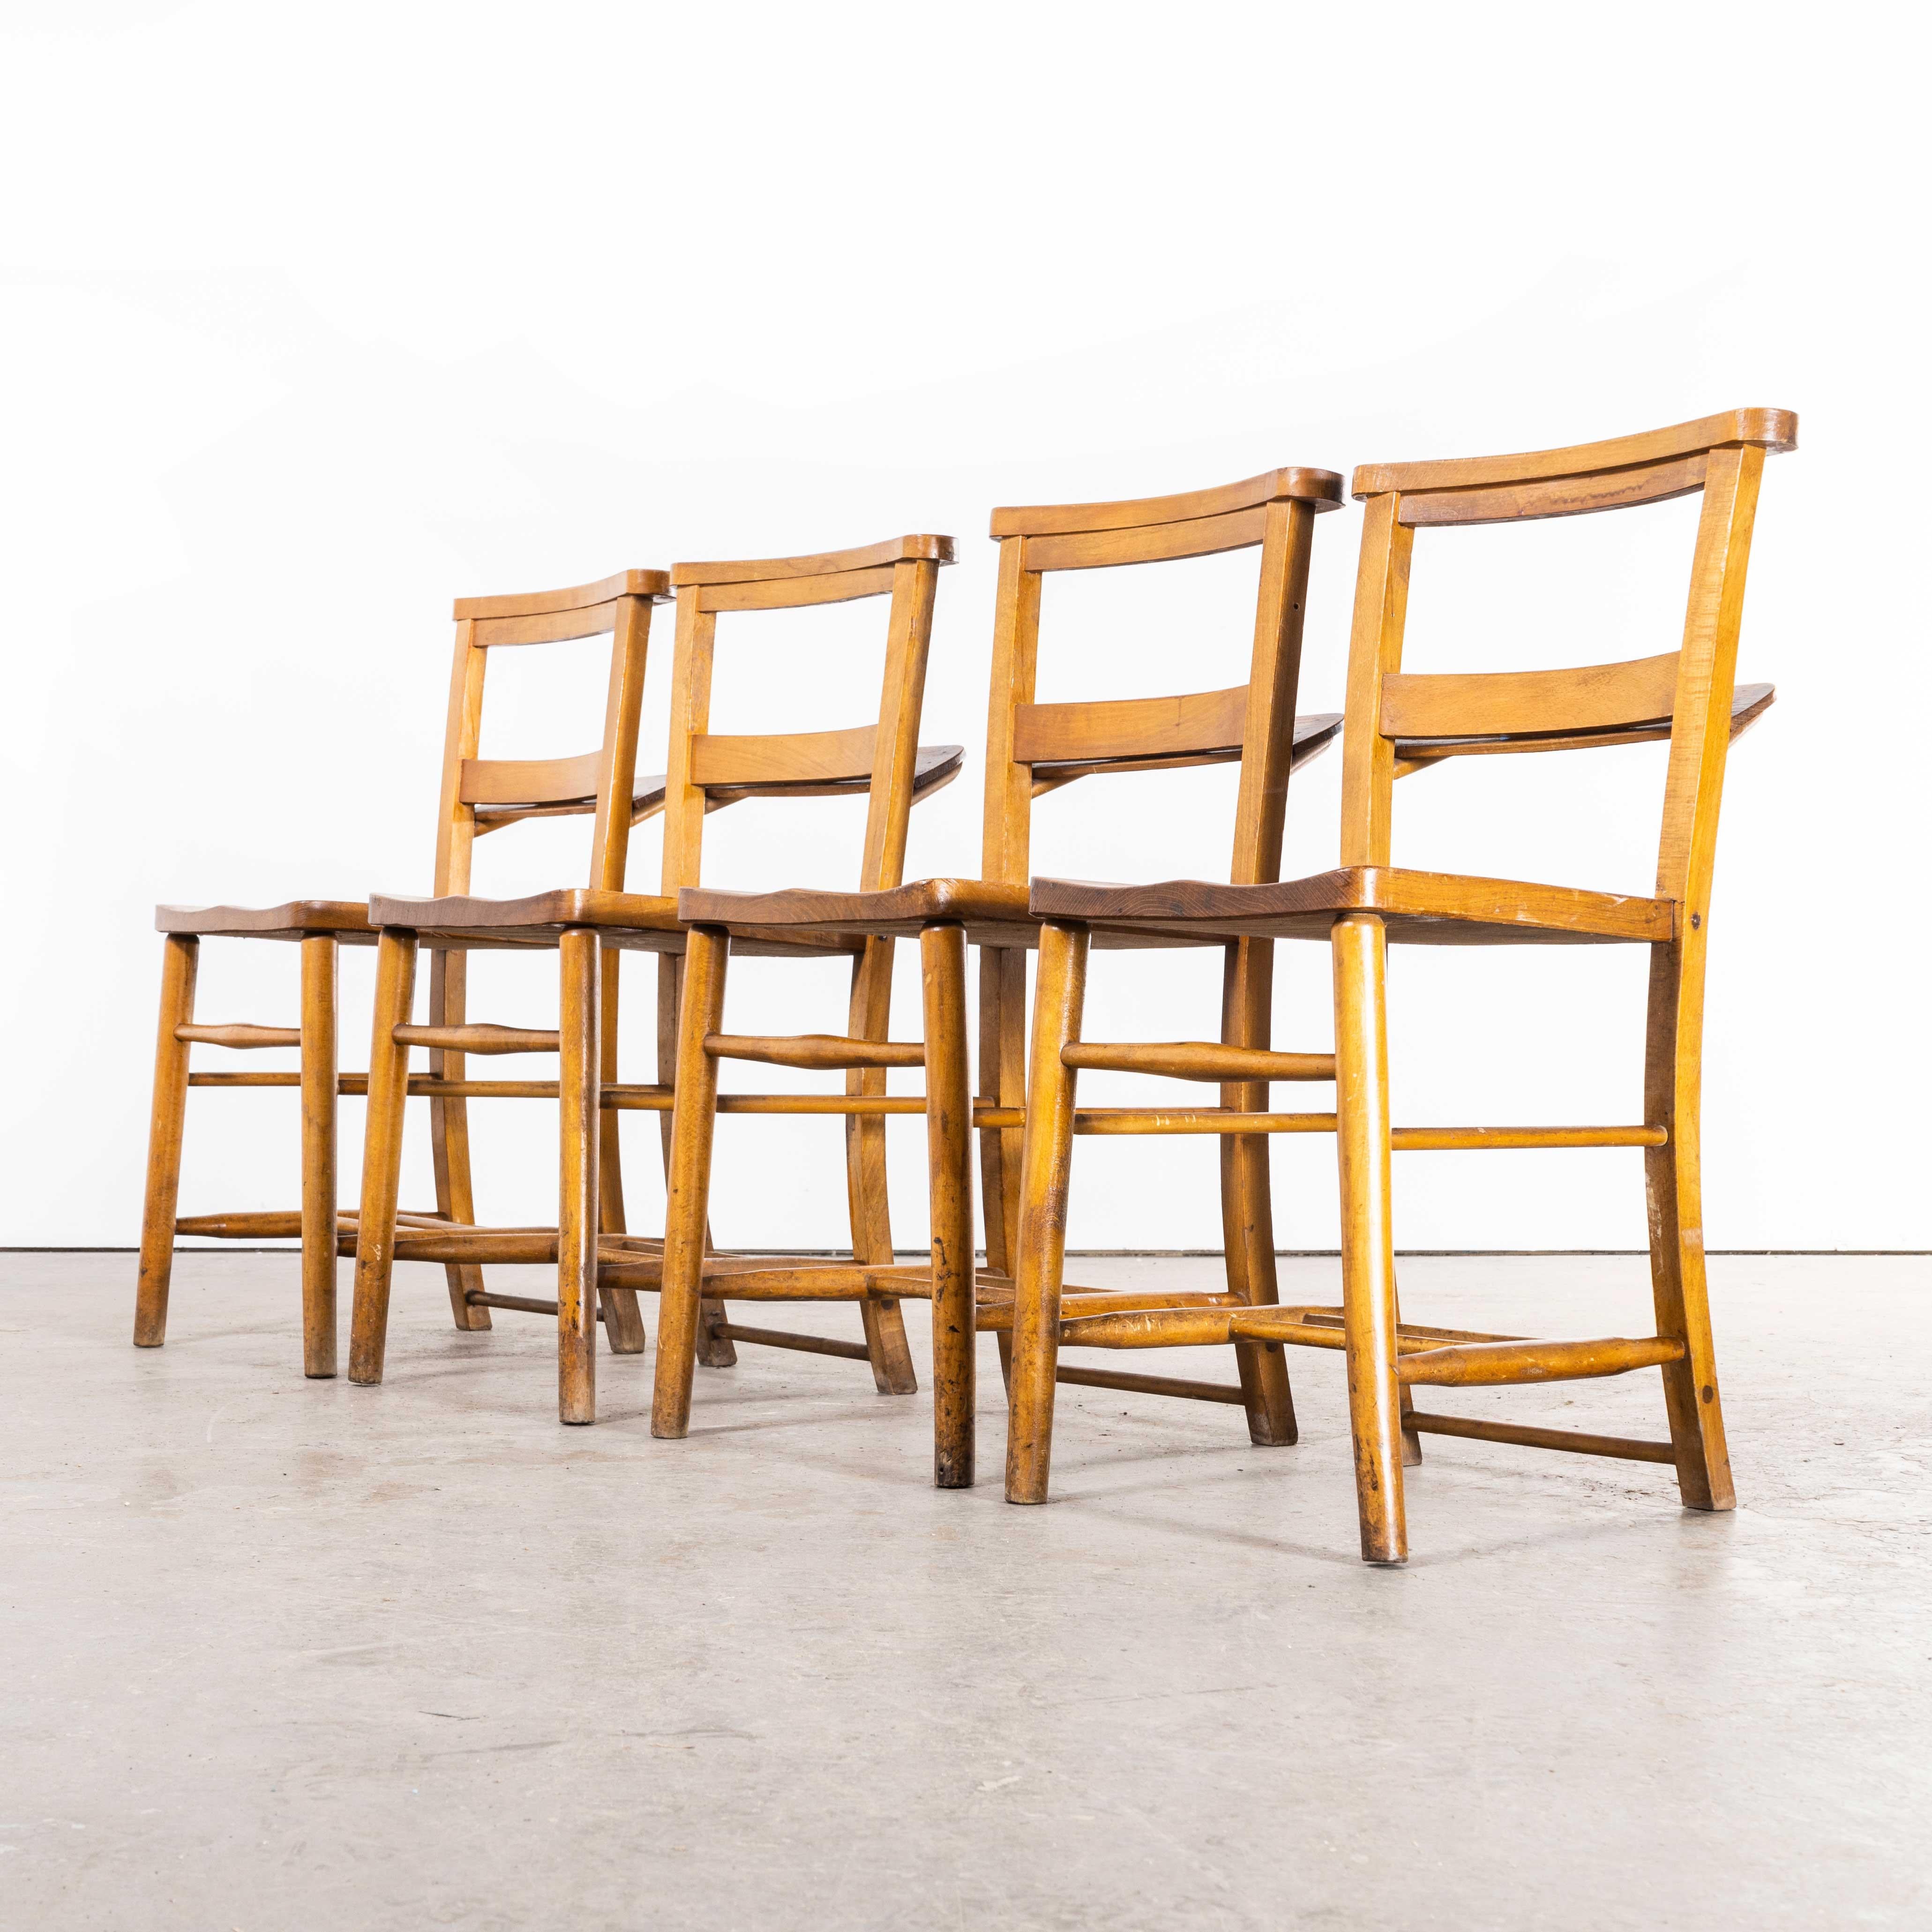 1930s Elm church dining chair – set of four.
1930s Elm church dining chair – set of four. England has a wonderfully rich heritage for making chairs. At the height of production at the turn of the last century over 4500 chairs were being produced